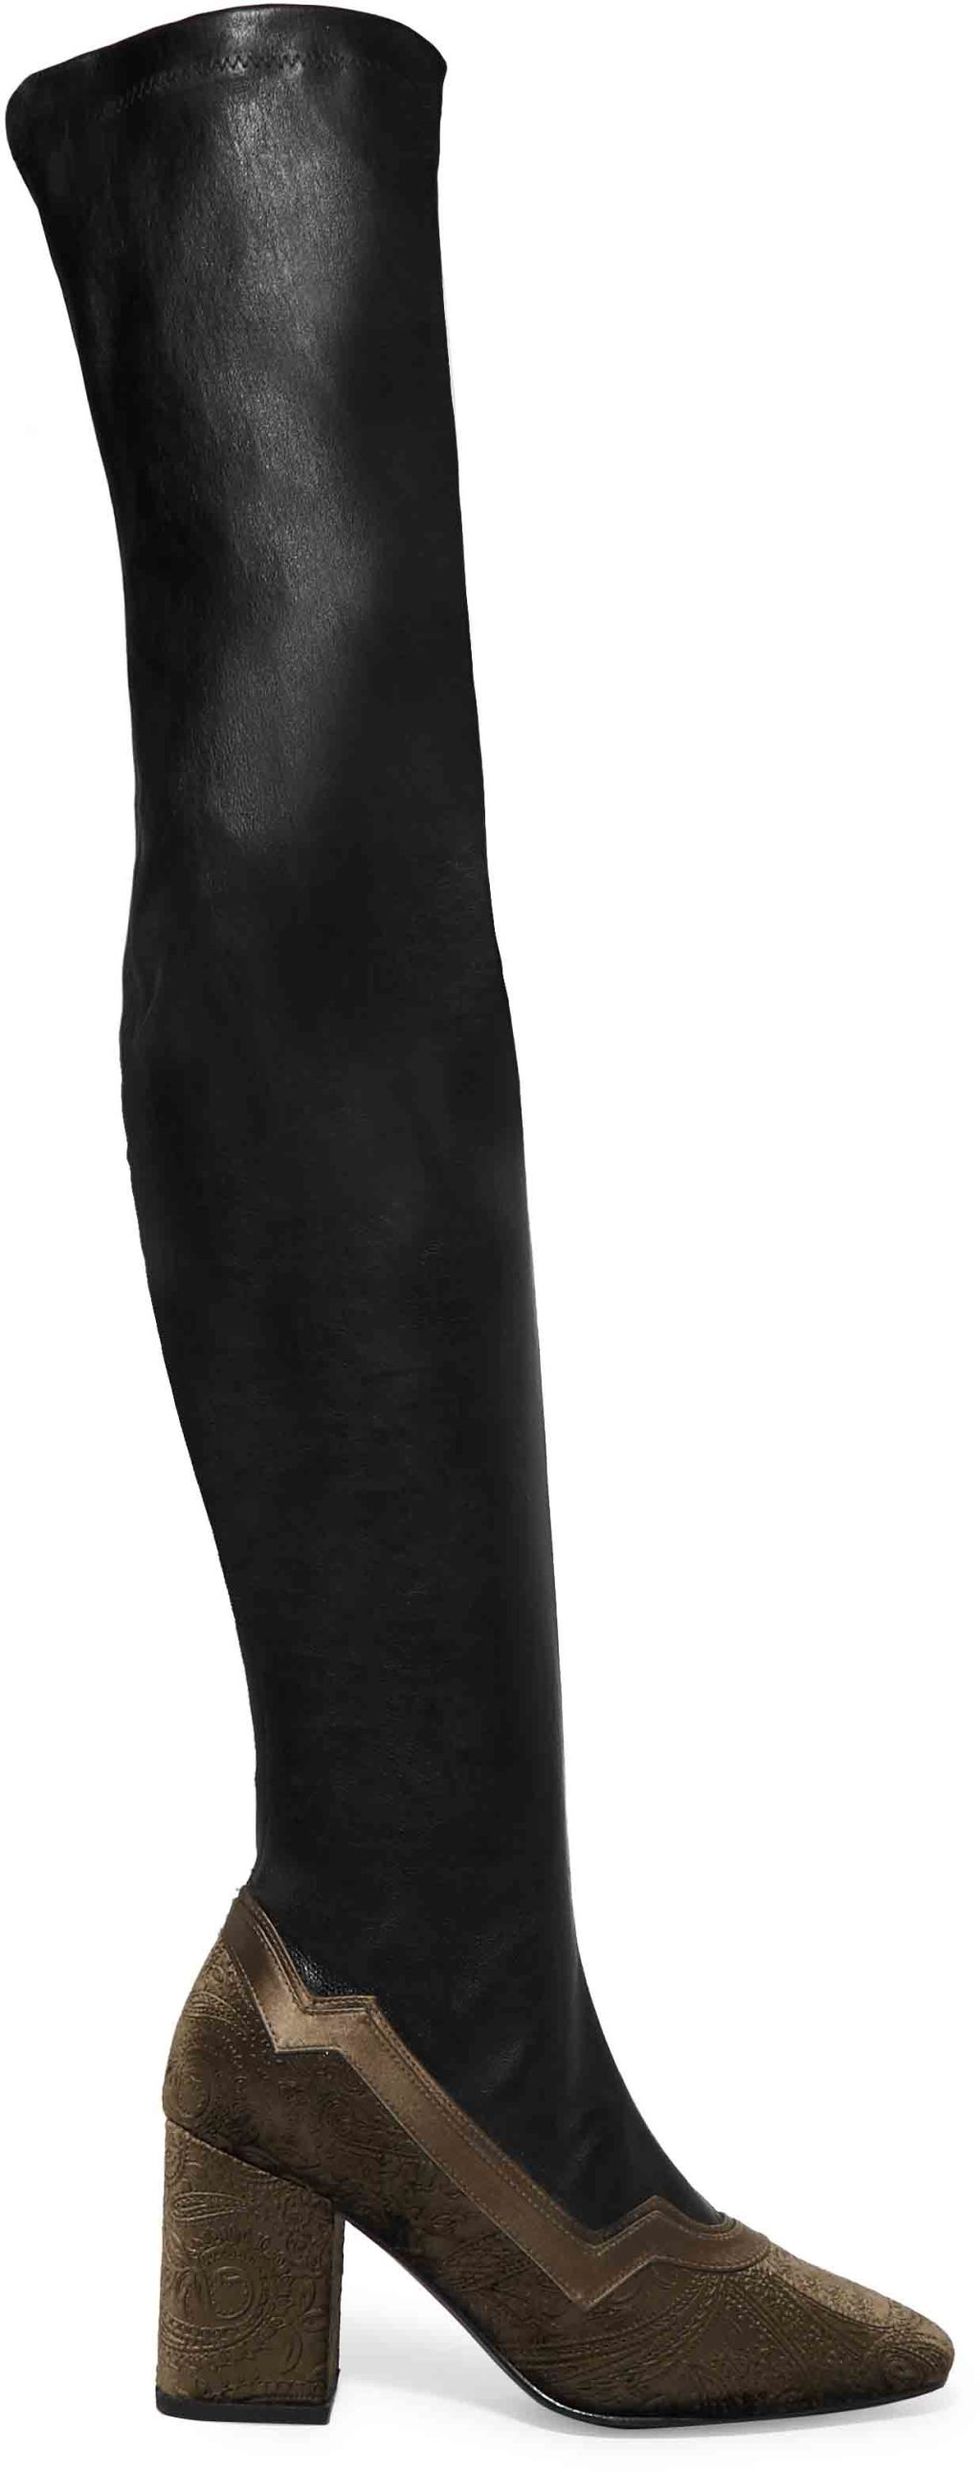 Human leg, Joint, Black, Costume accessory, Sock, Foot, Ankle, 